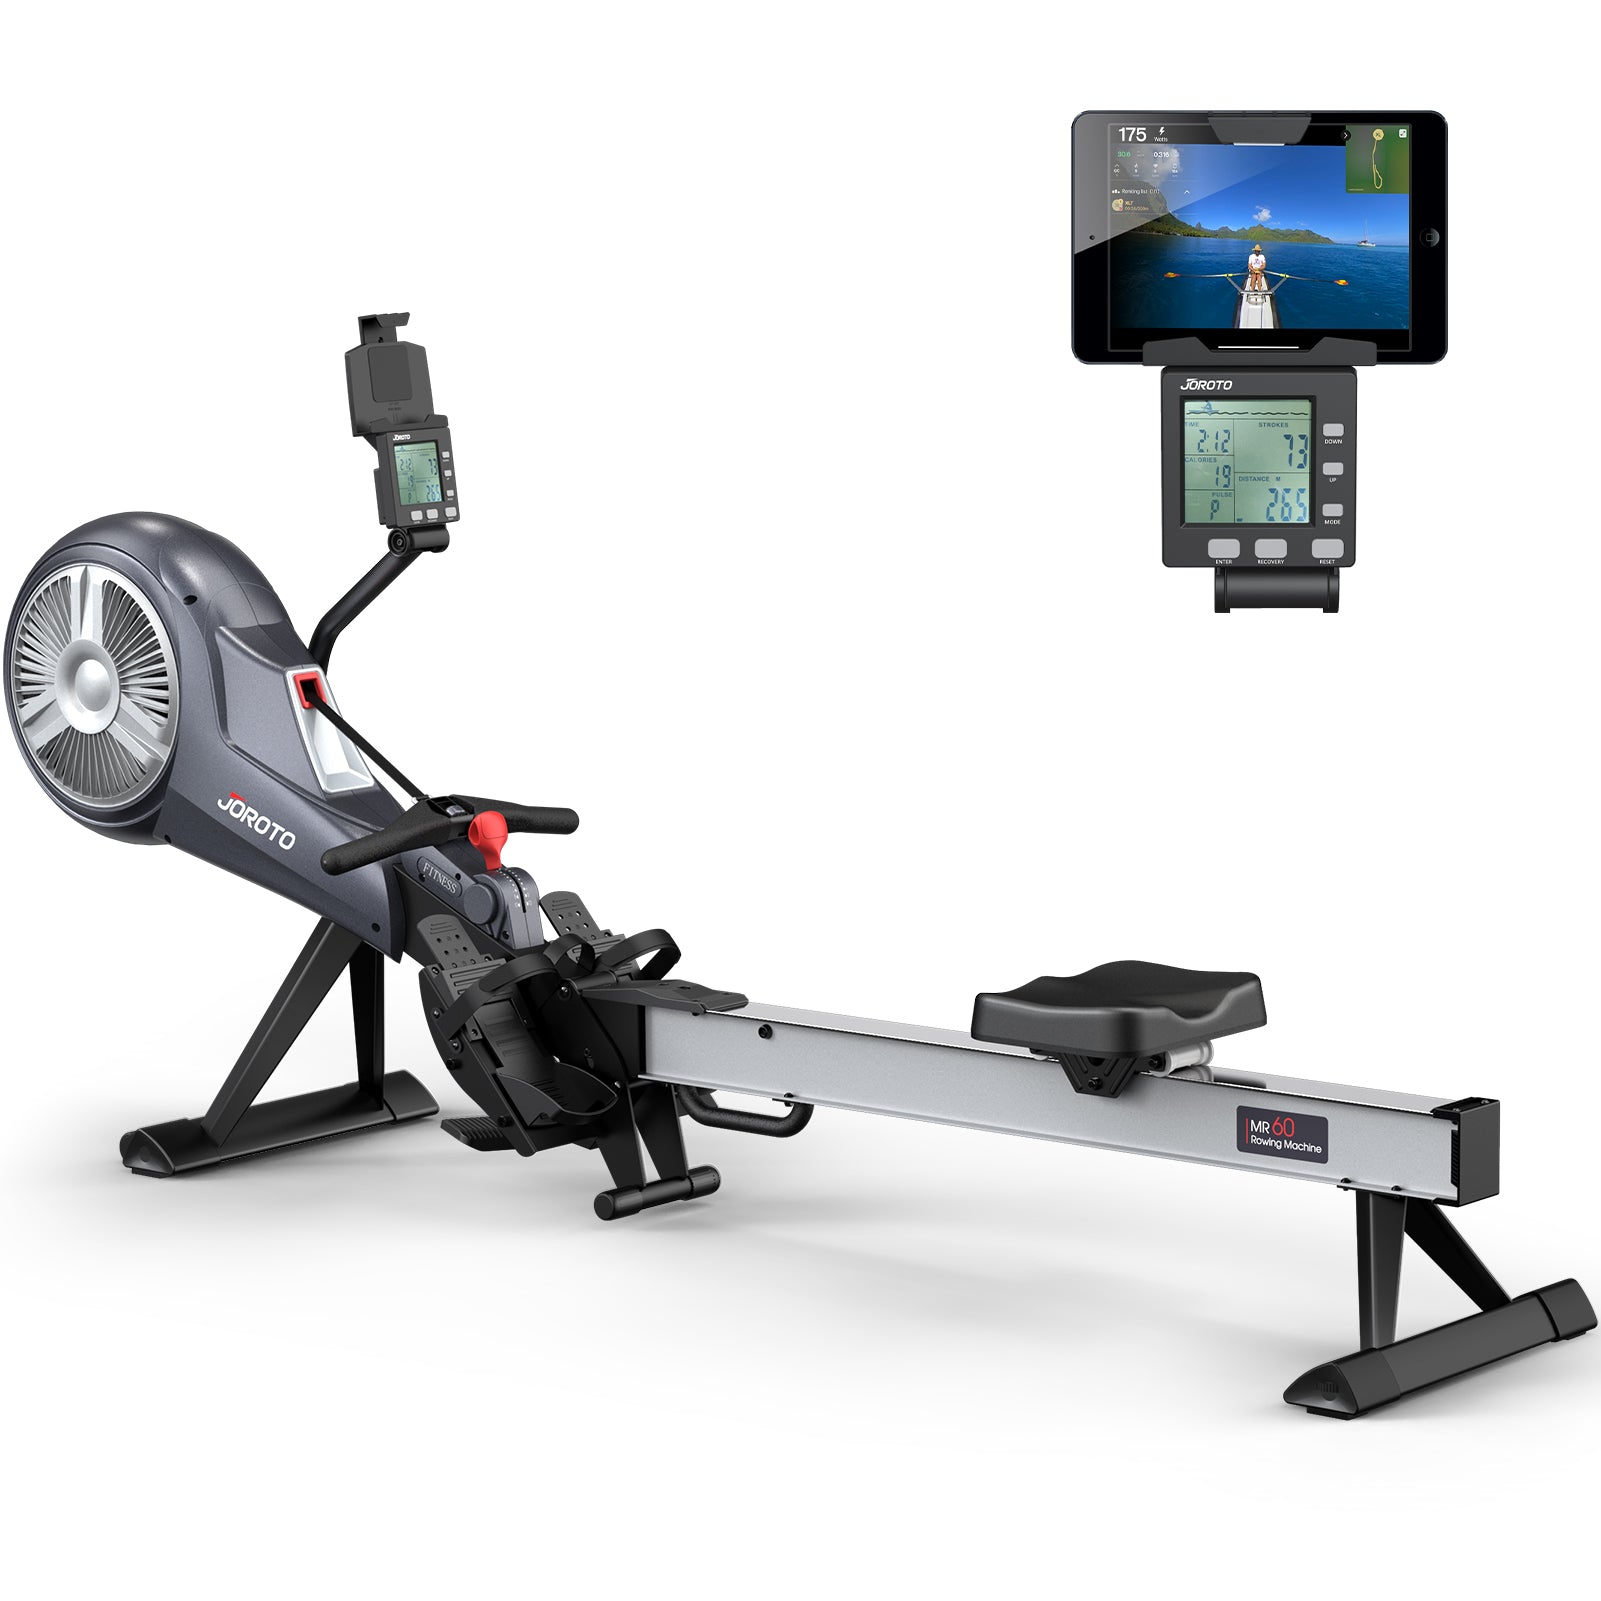 Foldable Rowing Machine - Air & Magnetic Resistance for Home Use, with Bluetooth & Smart Backlit Monitor MR60, Postpartum Use is also Very Safe-Trainnox